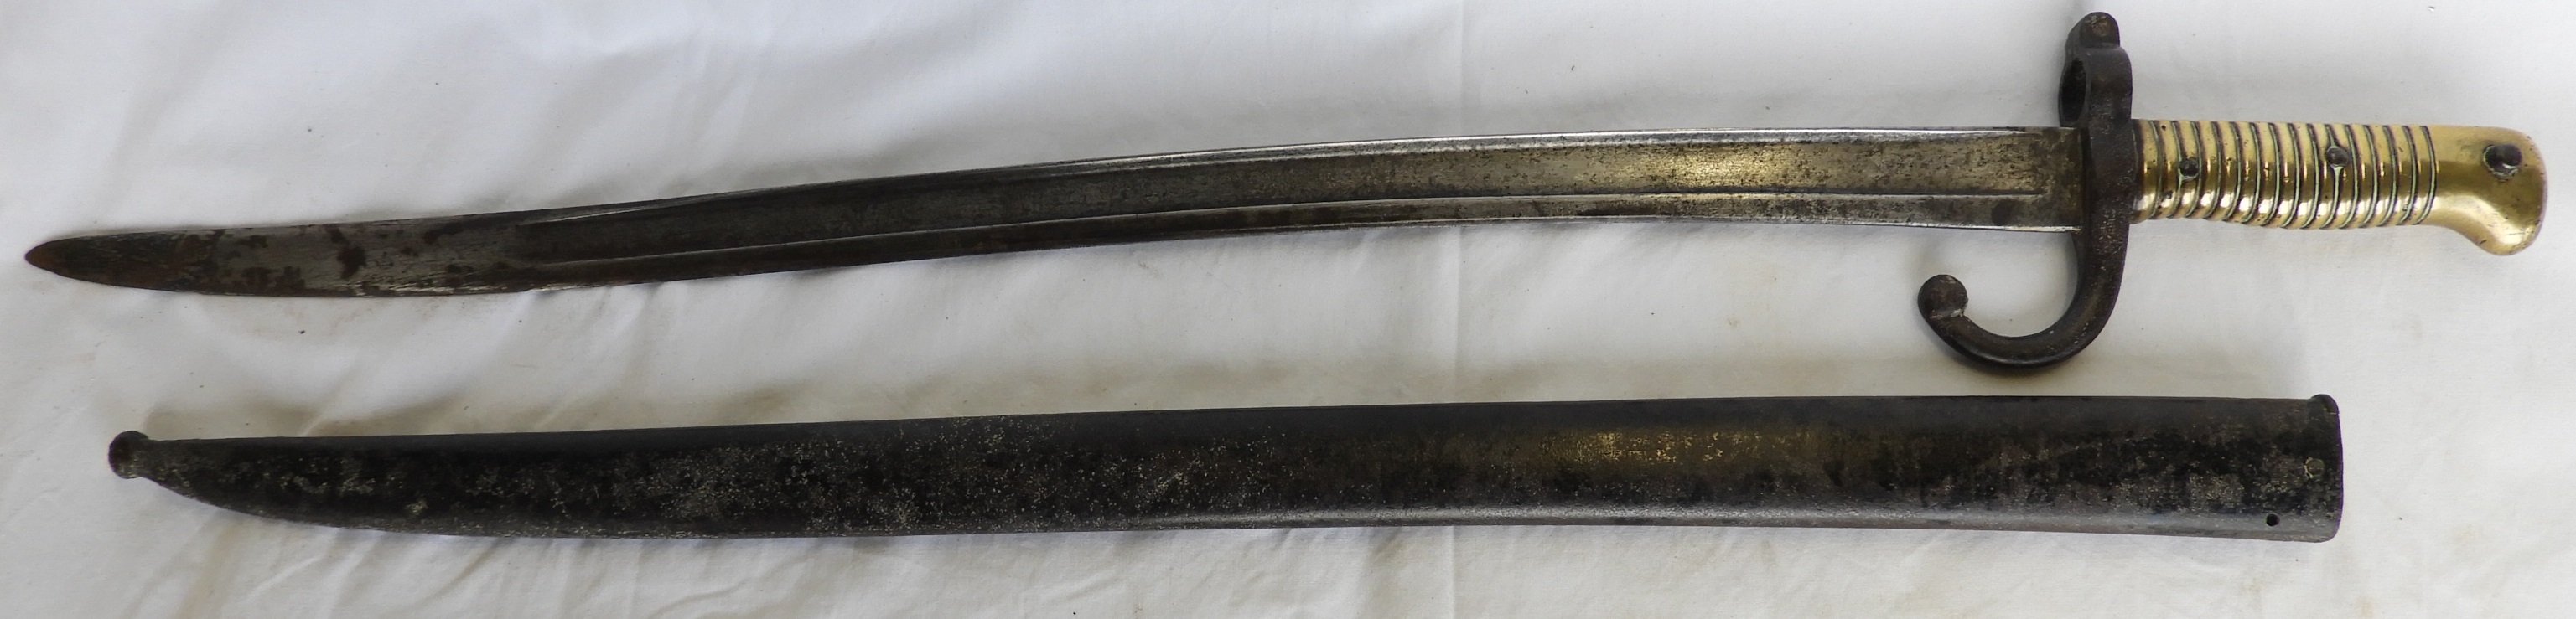 FRENCH SWORD BAYONET IN SCABBARD CROWNED HEAD MARKING